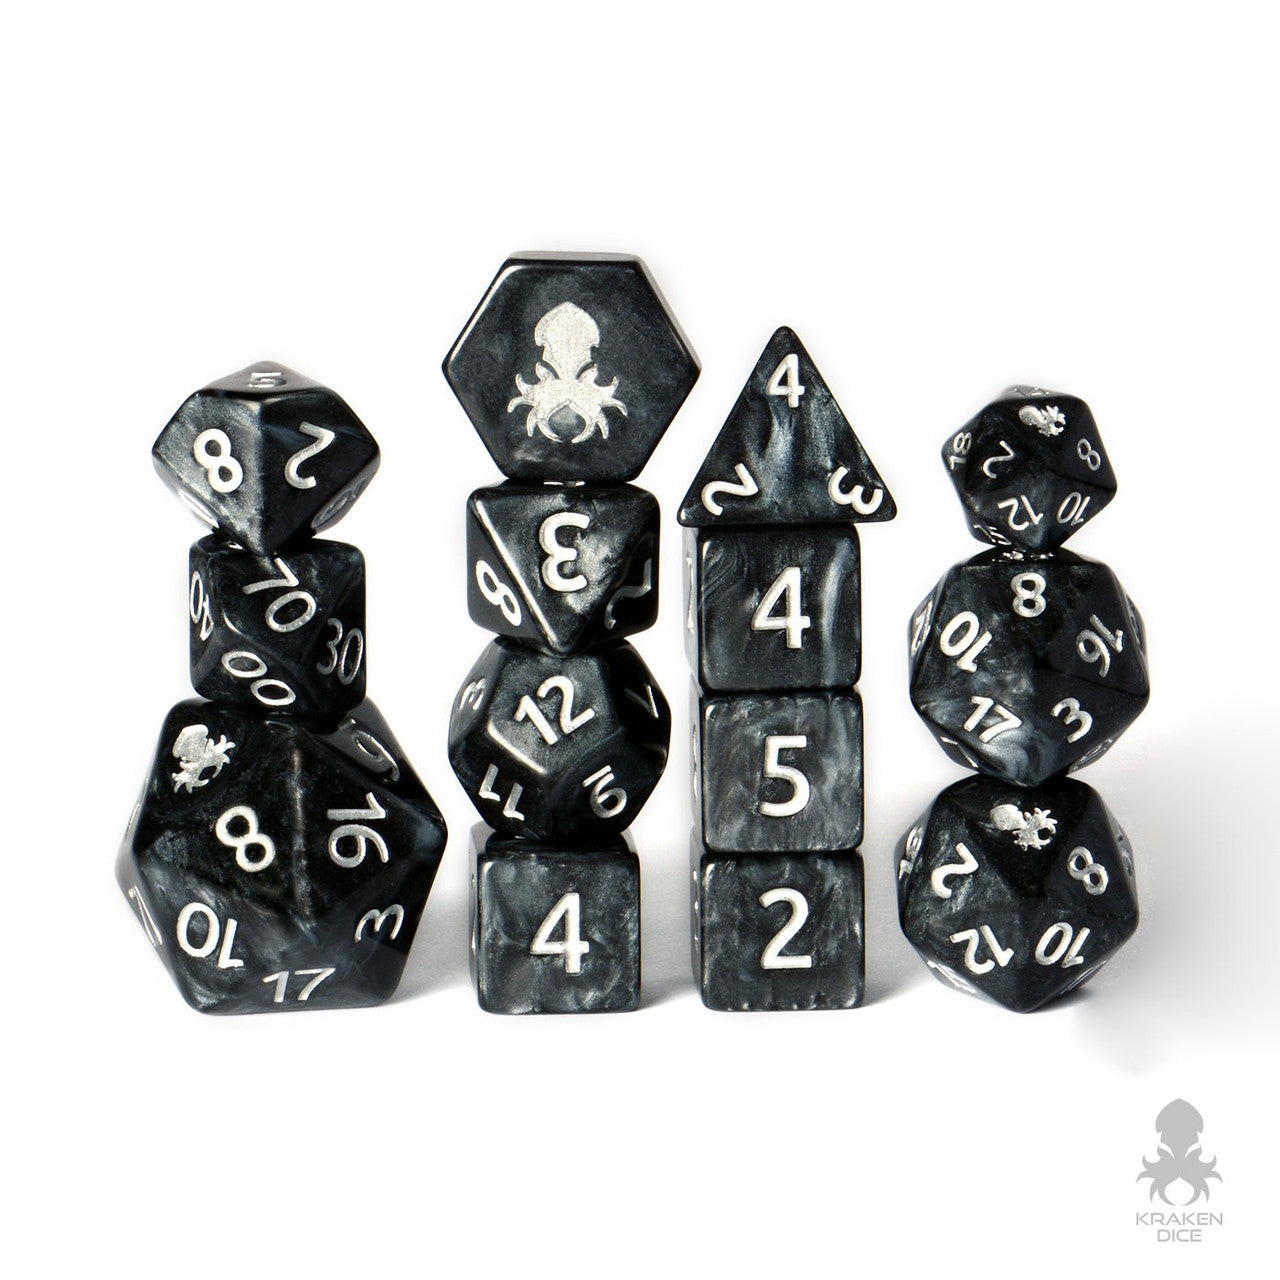 Iconic Black with Silver Ink 14pc DnD Dice Set With Kraken Logo